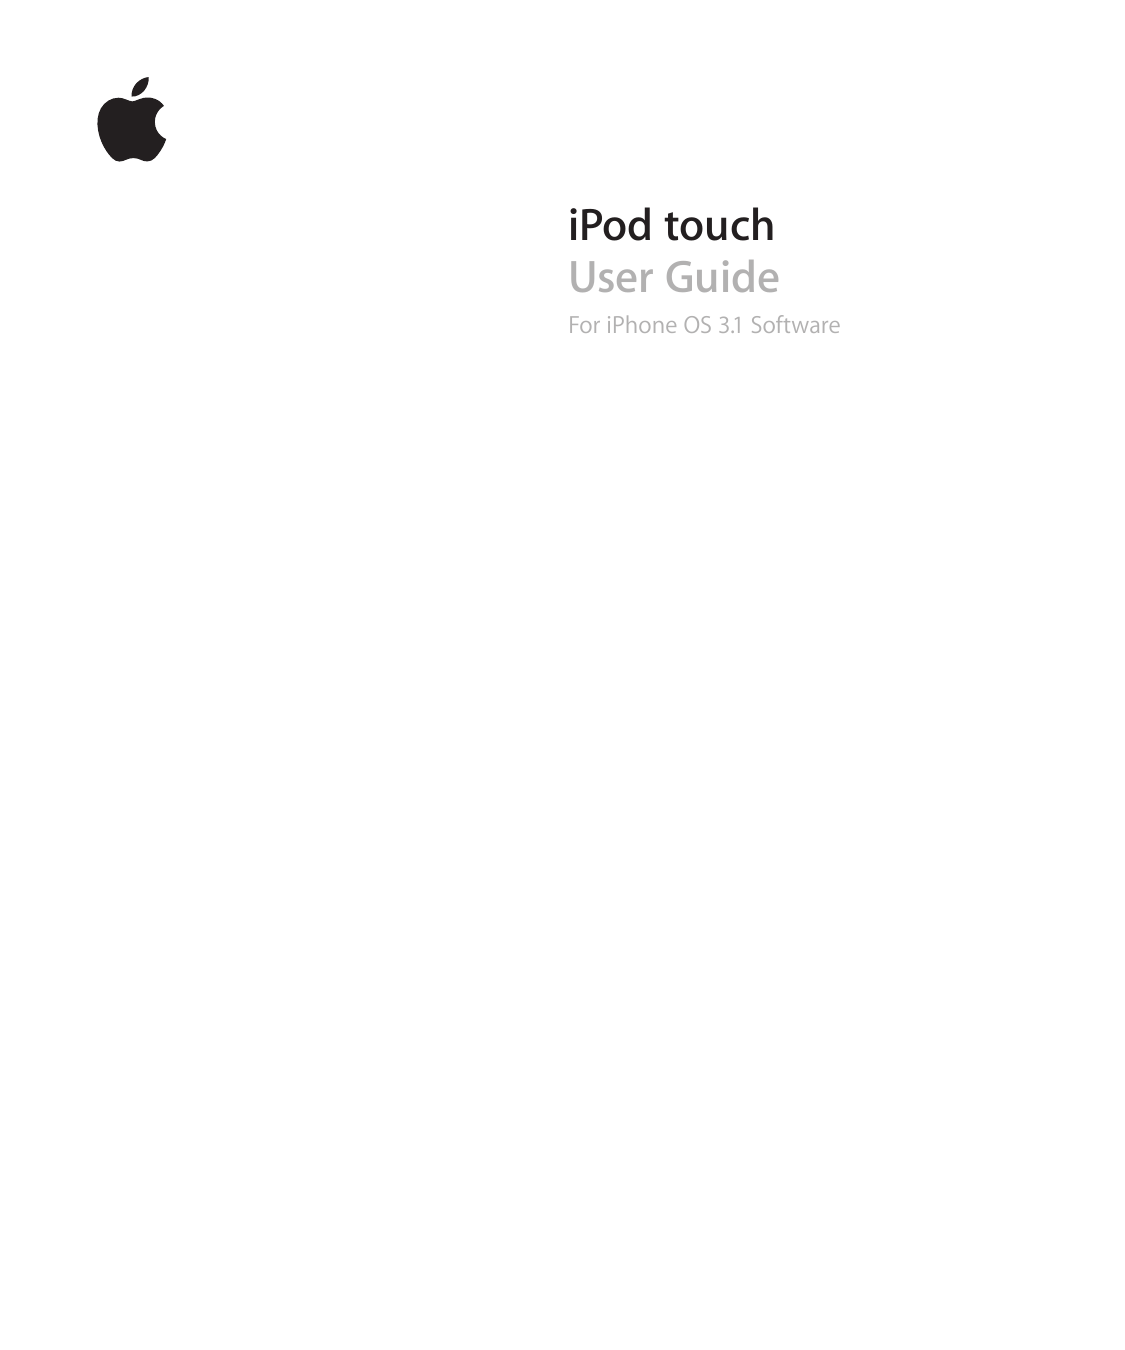 iPod touchUser GuideFor iPhone OS 3.1 Software